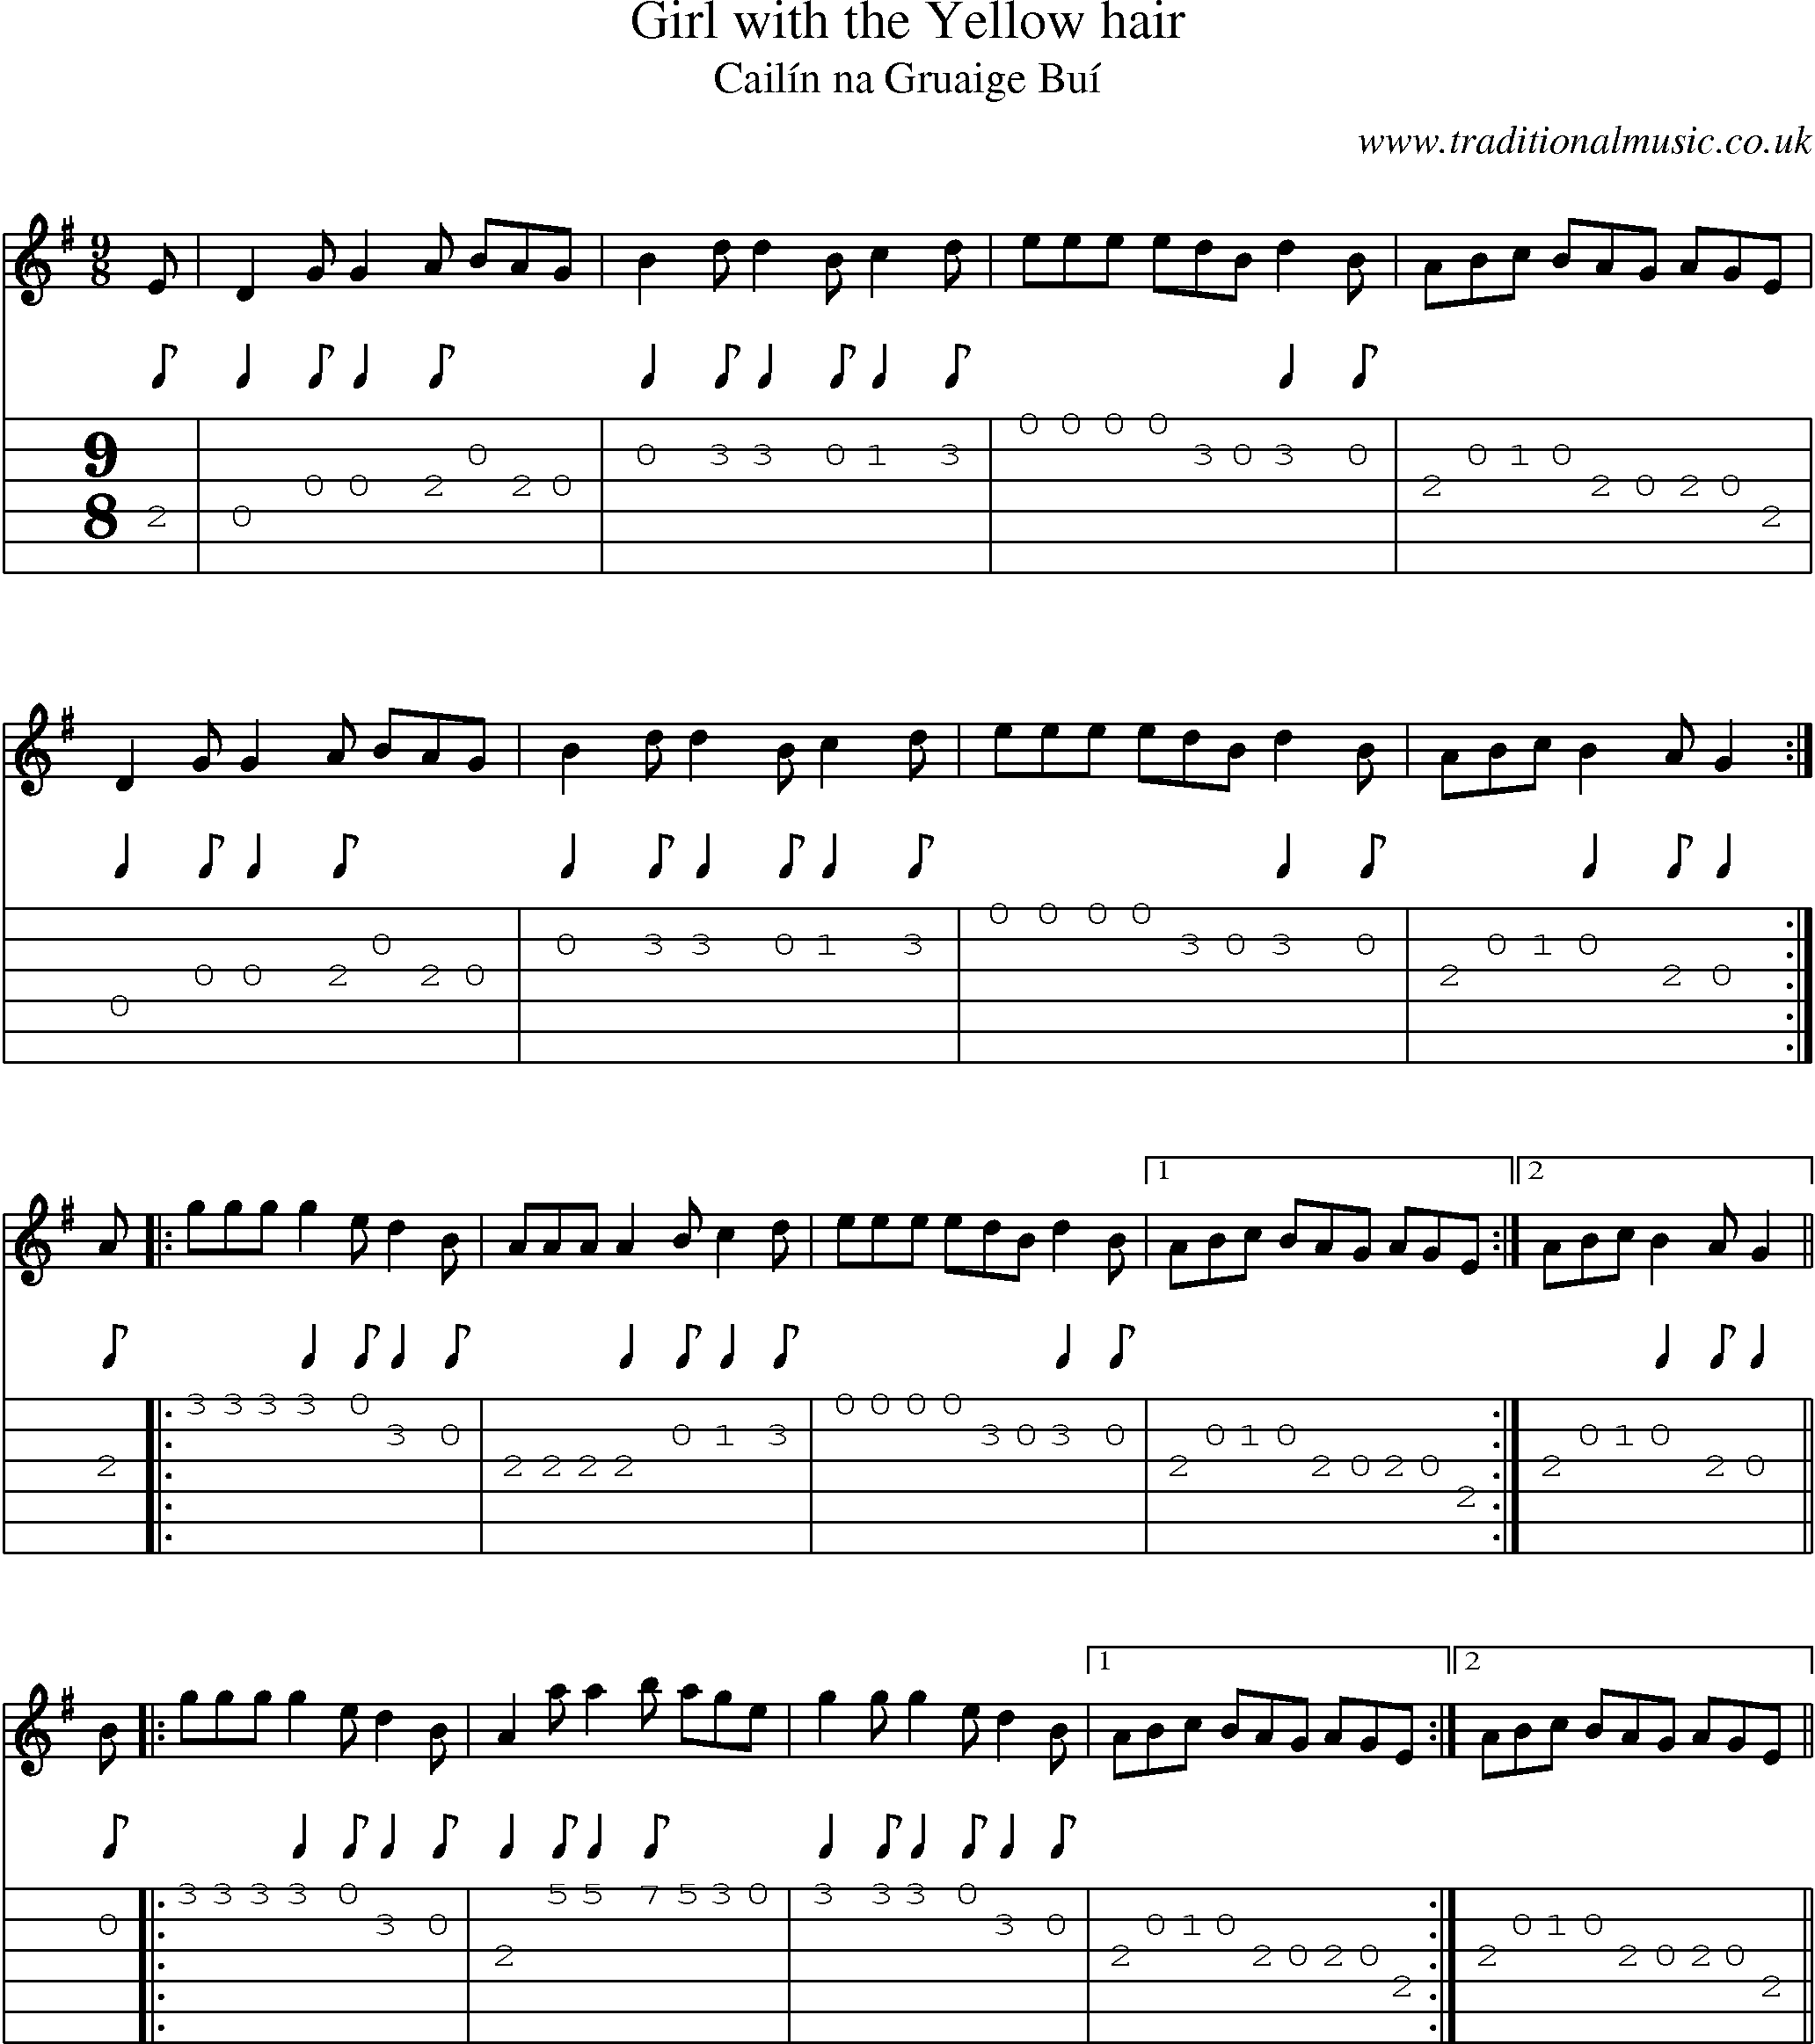 Music Score and Guitar Tabs for Girl With Yellow Hair